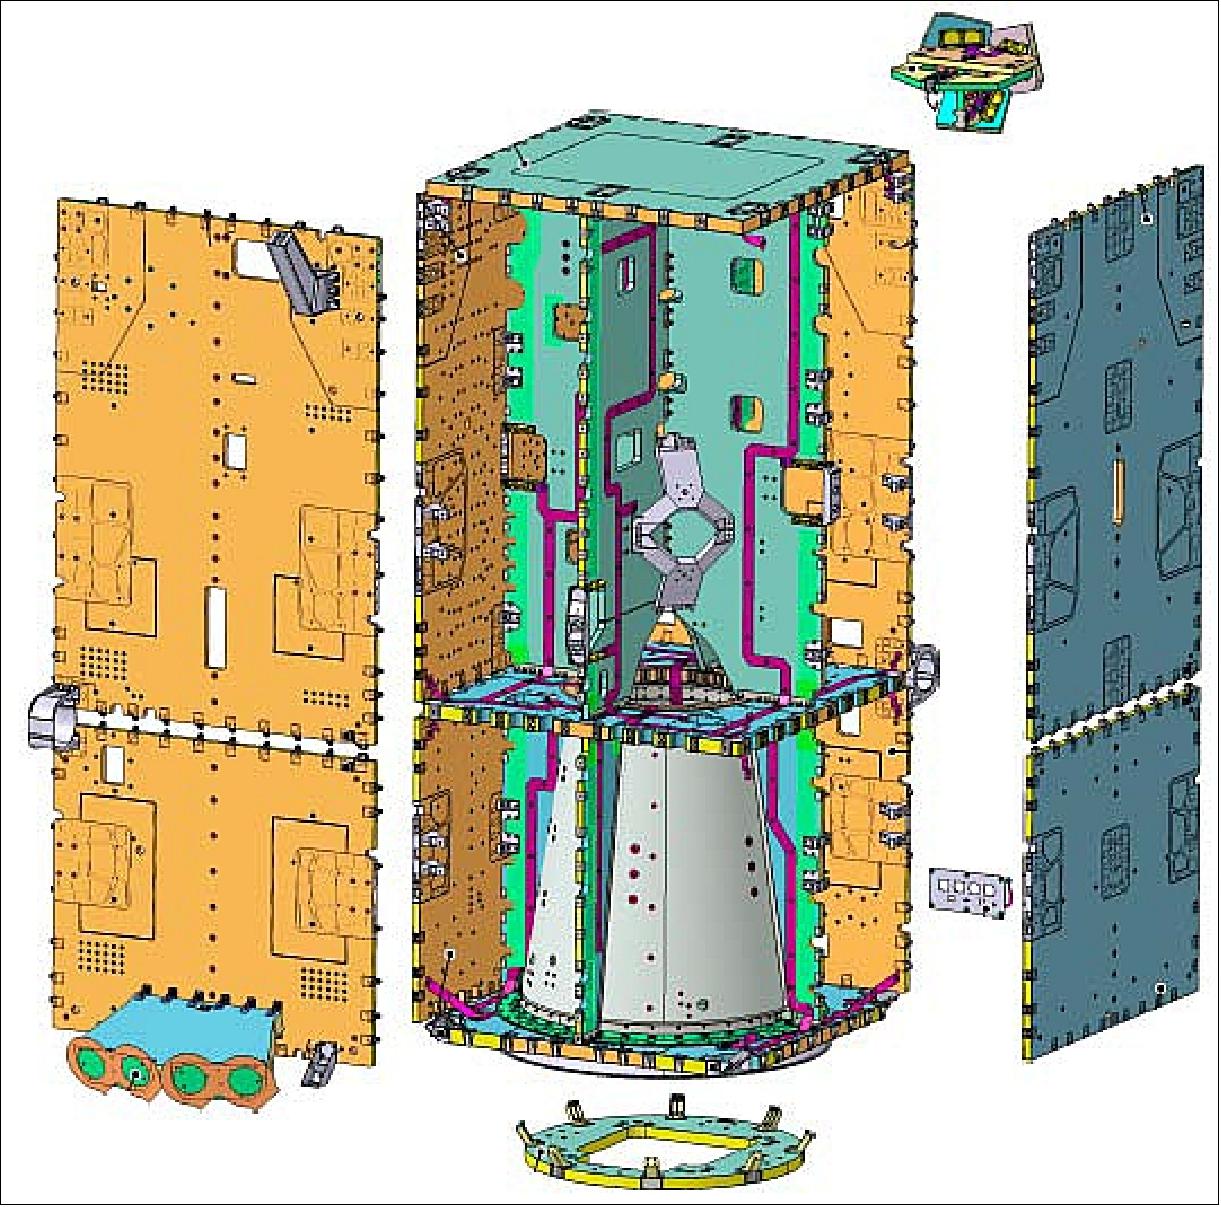  3D exploded view of the Sentinel-1 platform